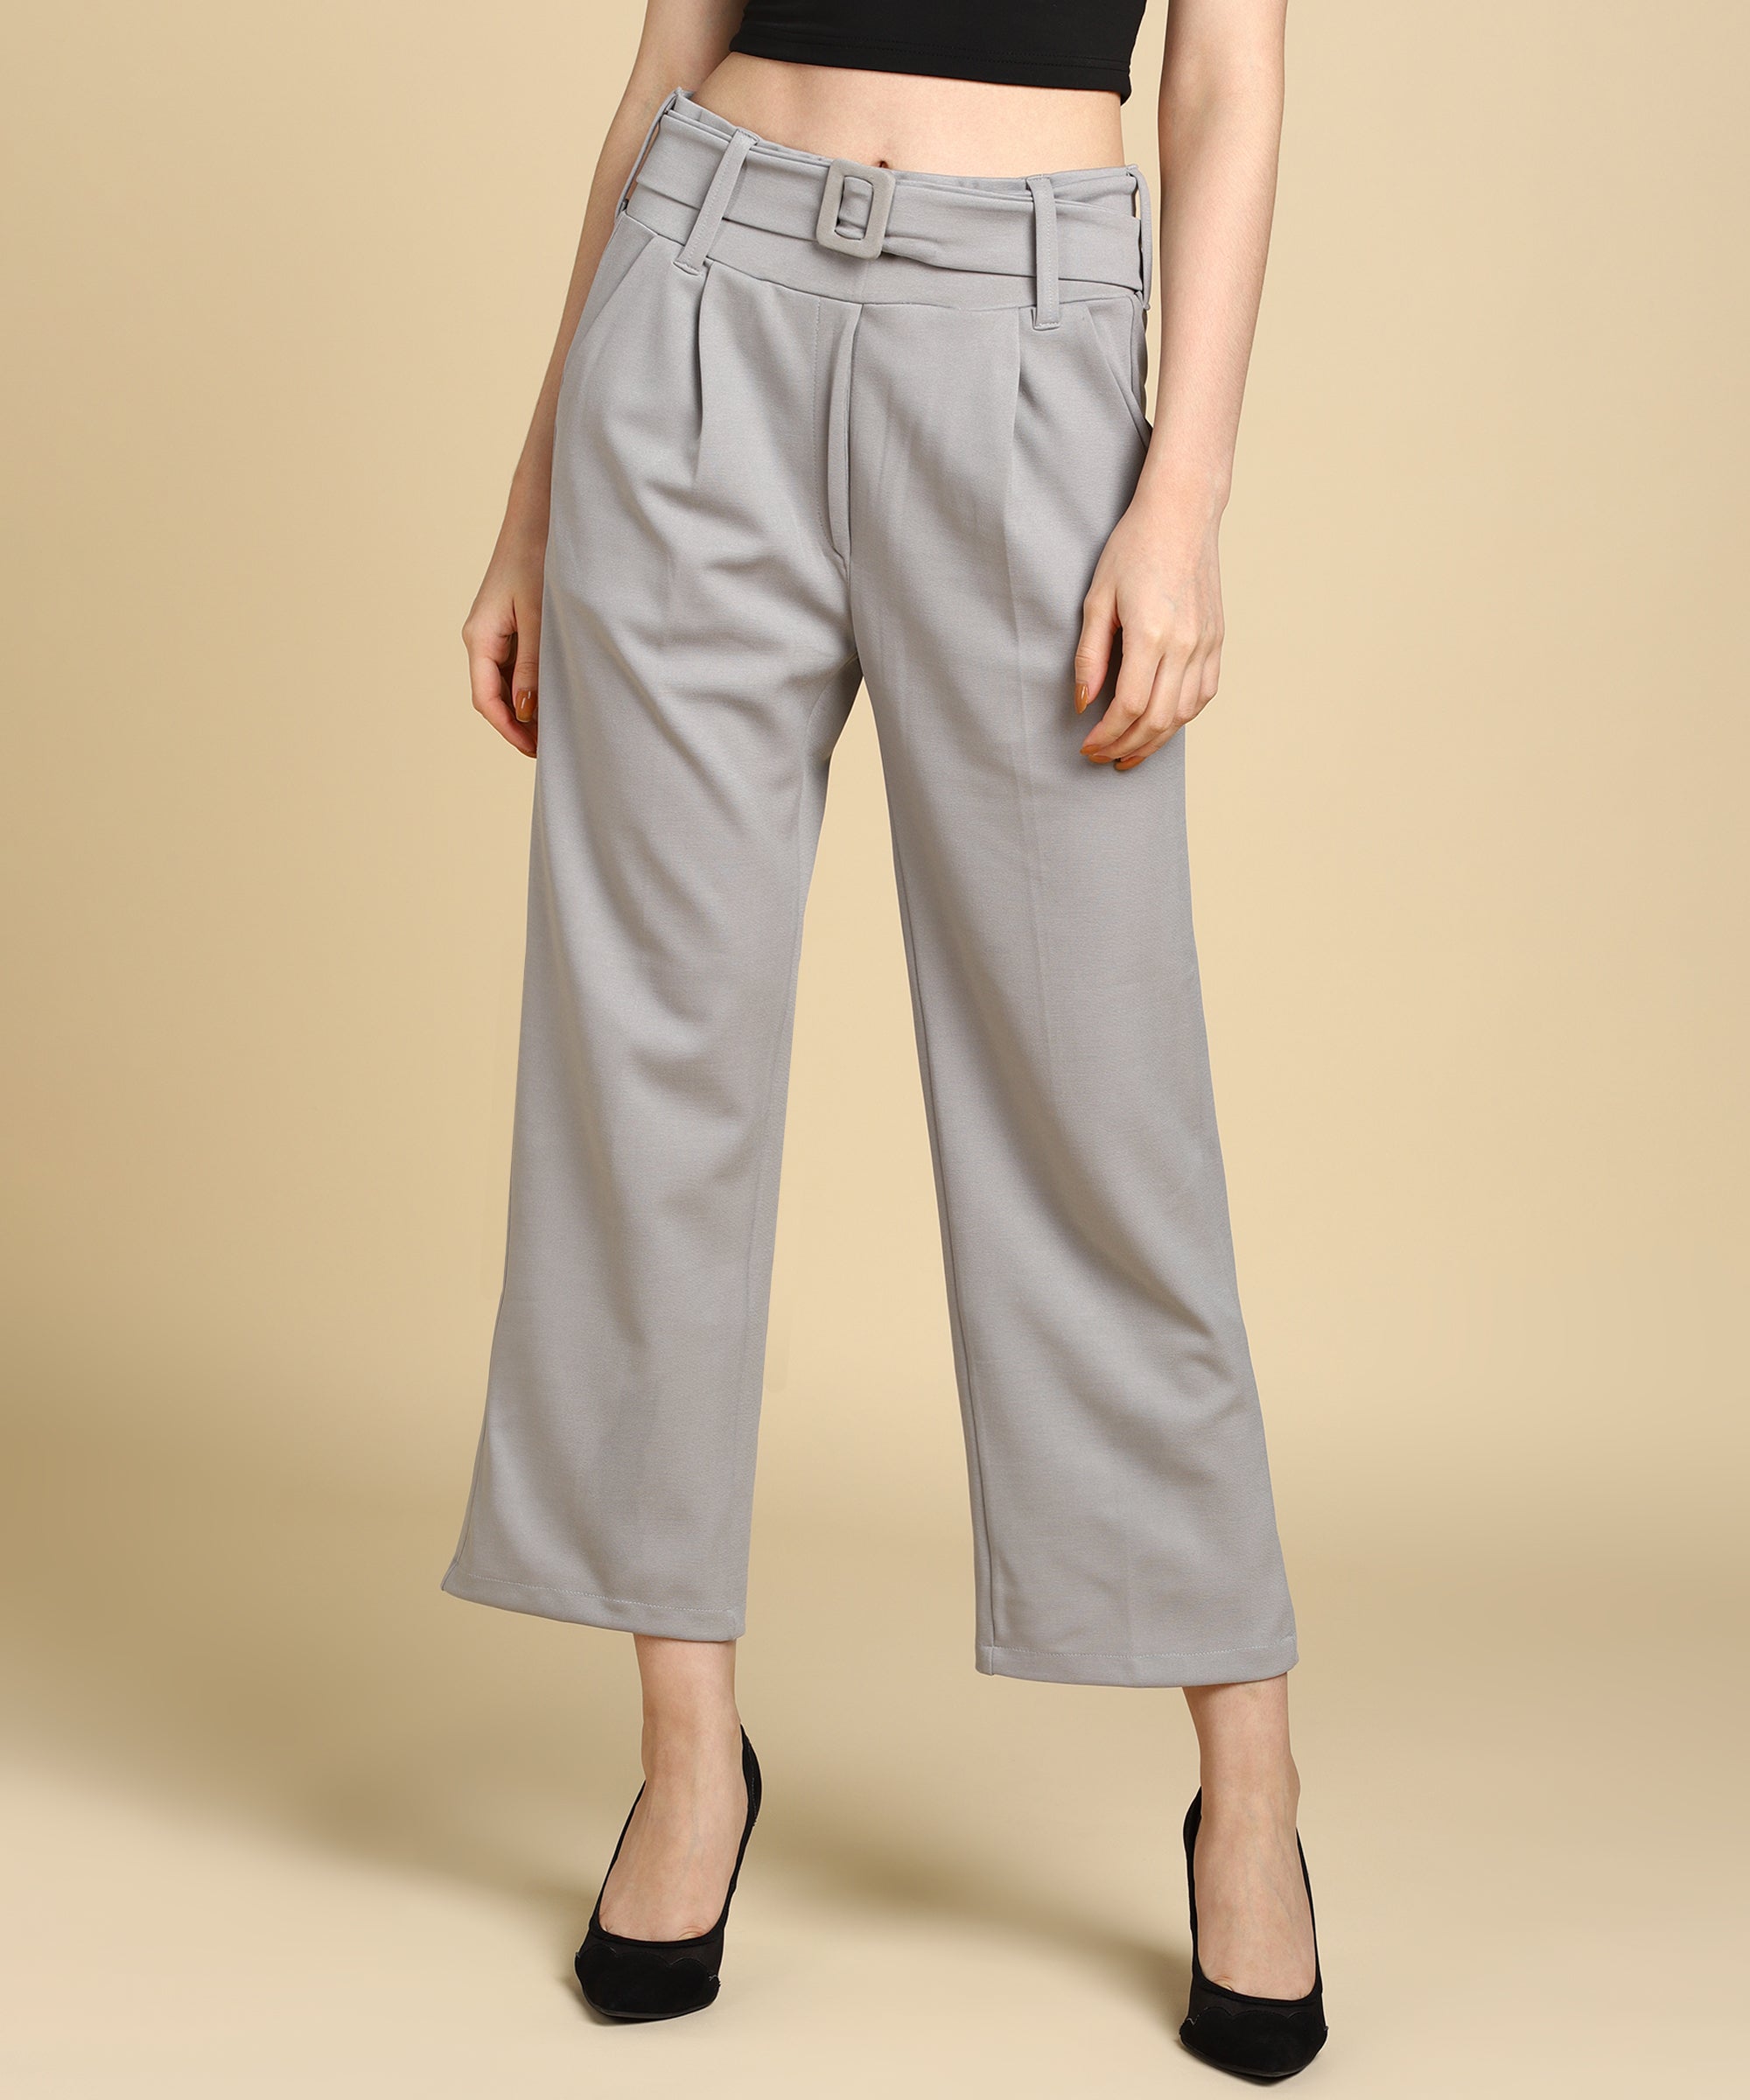 Buy Kalini Formal Trousers & Hight Waist Pants online - Women - 3 products  | FASHIOLA INDIA